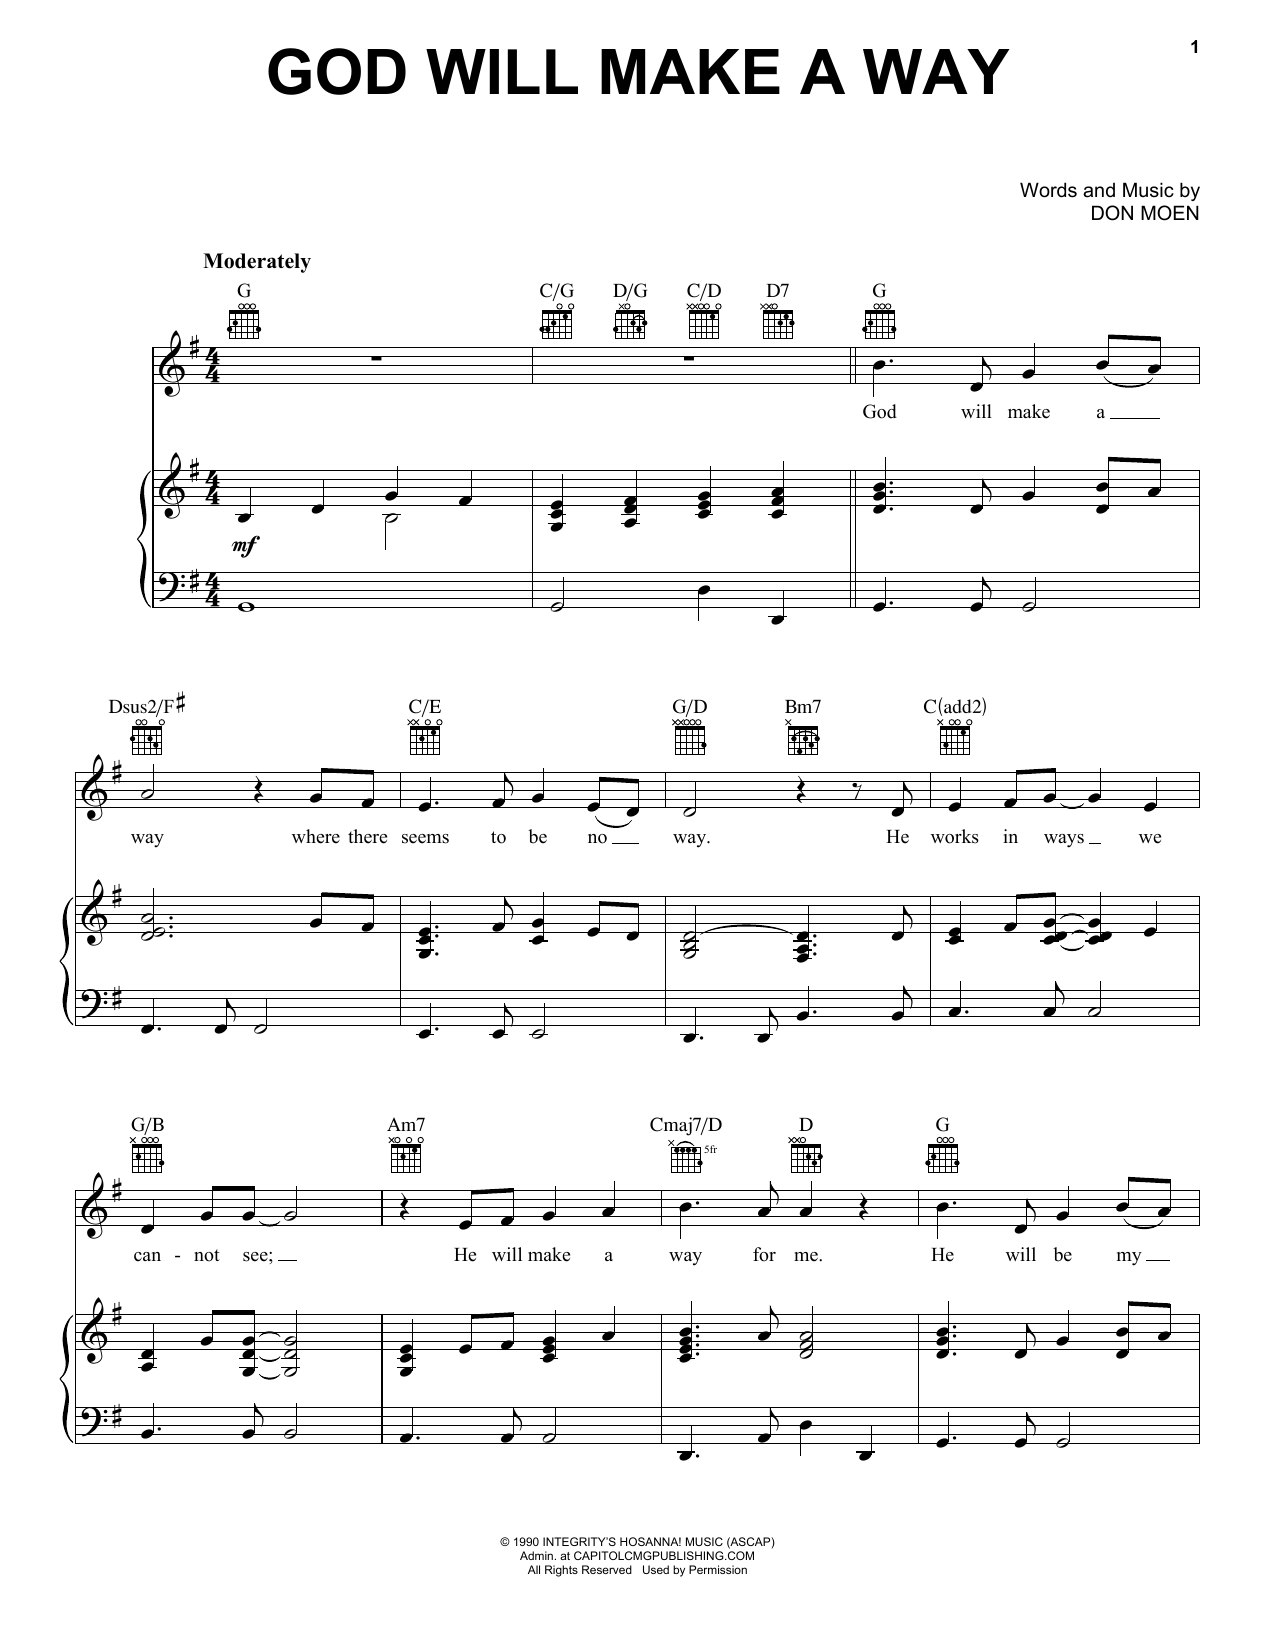 Don Moen God Will Make A Way sheet music notes and chords. Download Printable PDF.